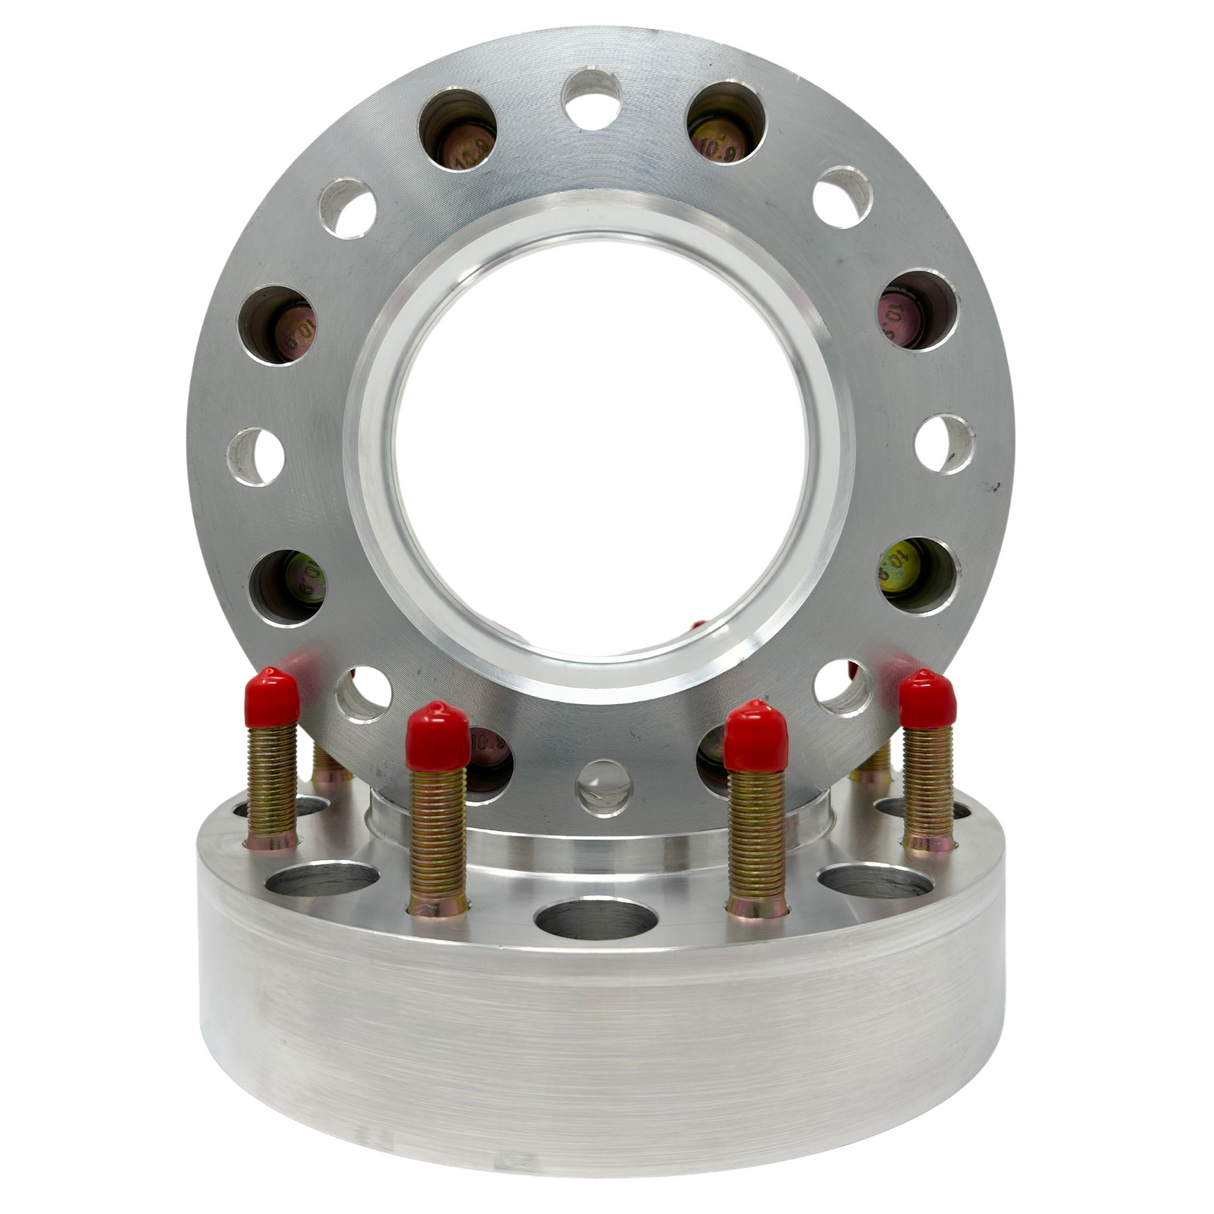 1” Inch Thick 8x6.5 To 8x180 Wheel Adapters Hub Centric Custom USA Made (25mm) For 8 Lug Chevy Silverado GMC Sierra + More | Use 2012 & Newer 8x180 Wheels On 2011 Older 8x6.5 or (8x165.1) Trucks | 116.7 Bore & 124.1 Lip | 14x1.5 Studs & Lugs Included